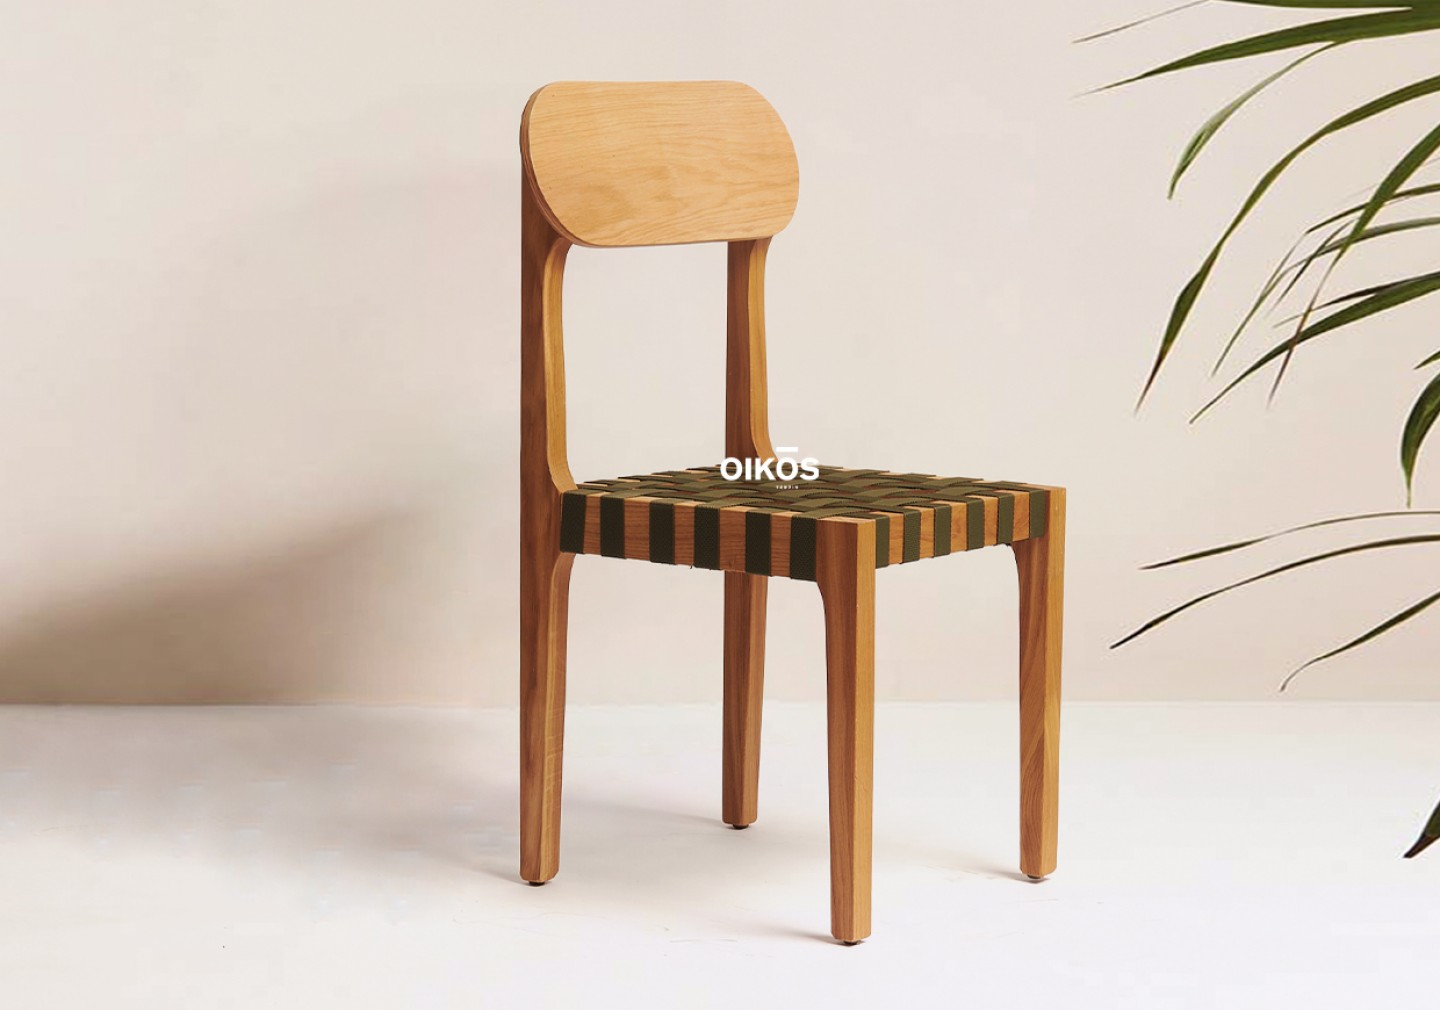 THE SKYE DINING CHAIR